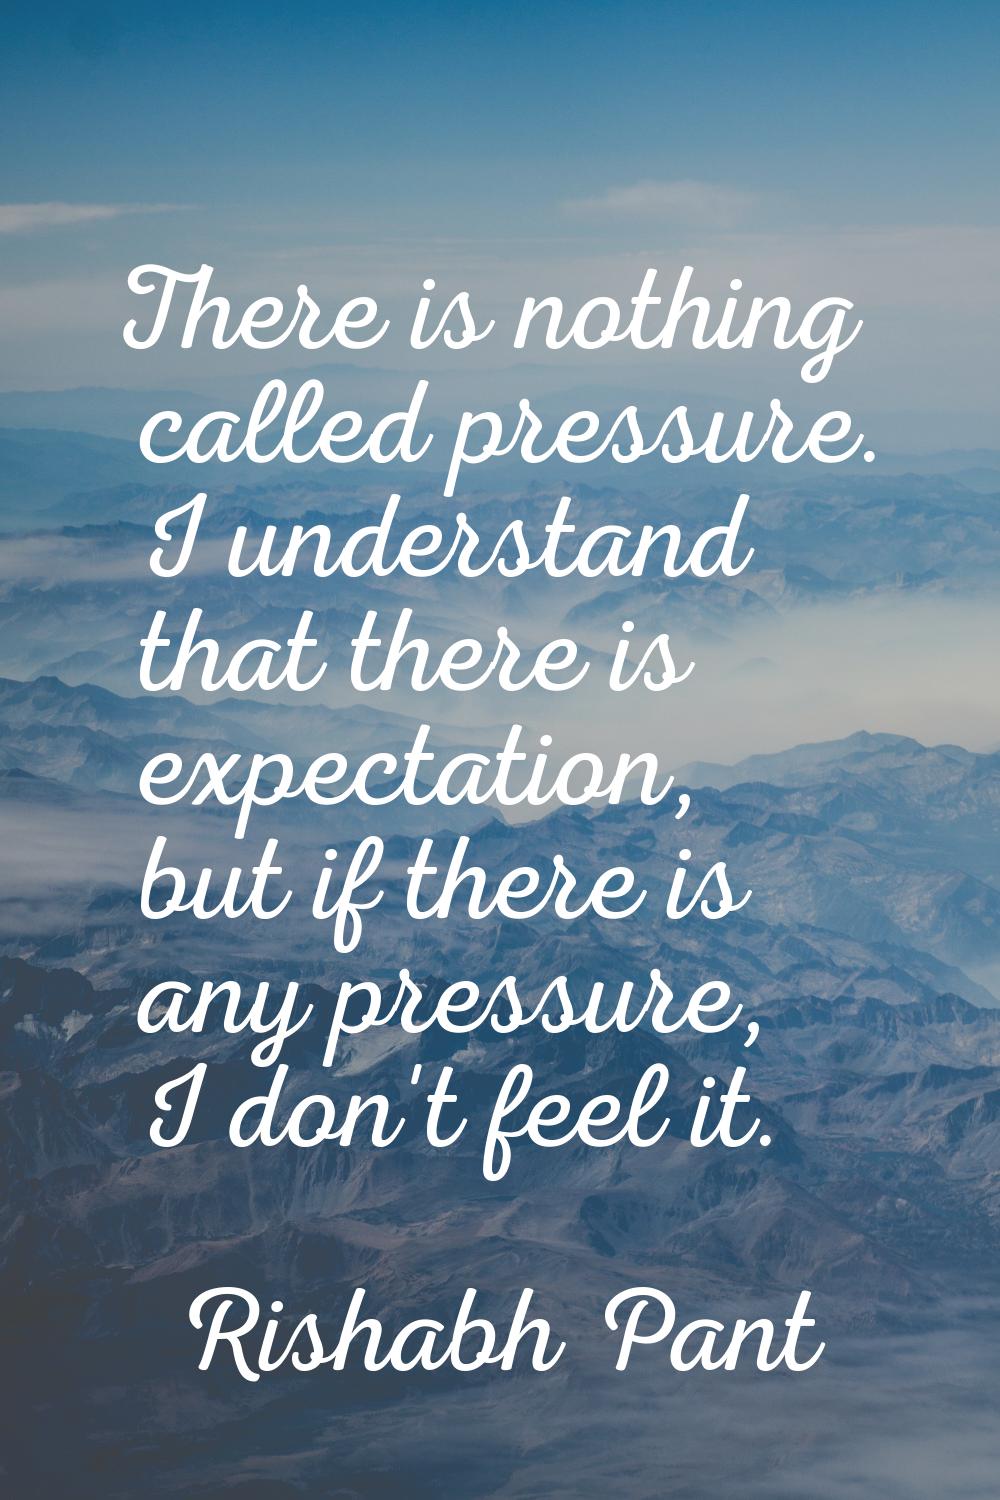 There is nothing called pressure. I understand that there is expectation, but if there is any press